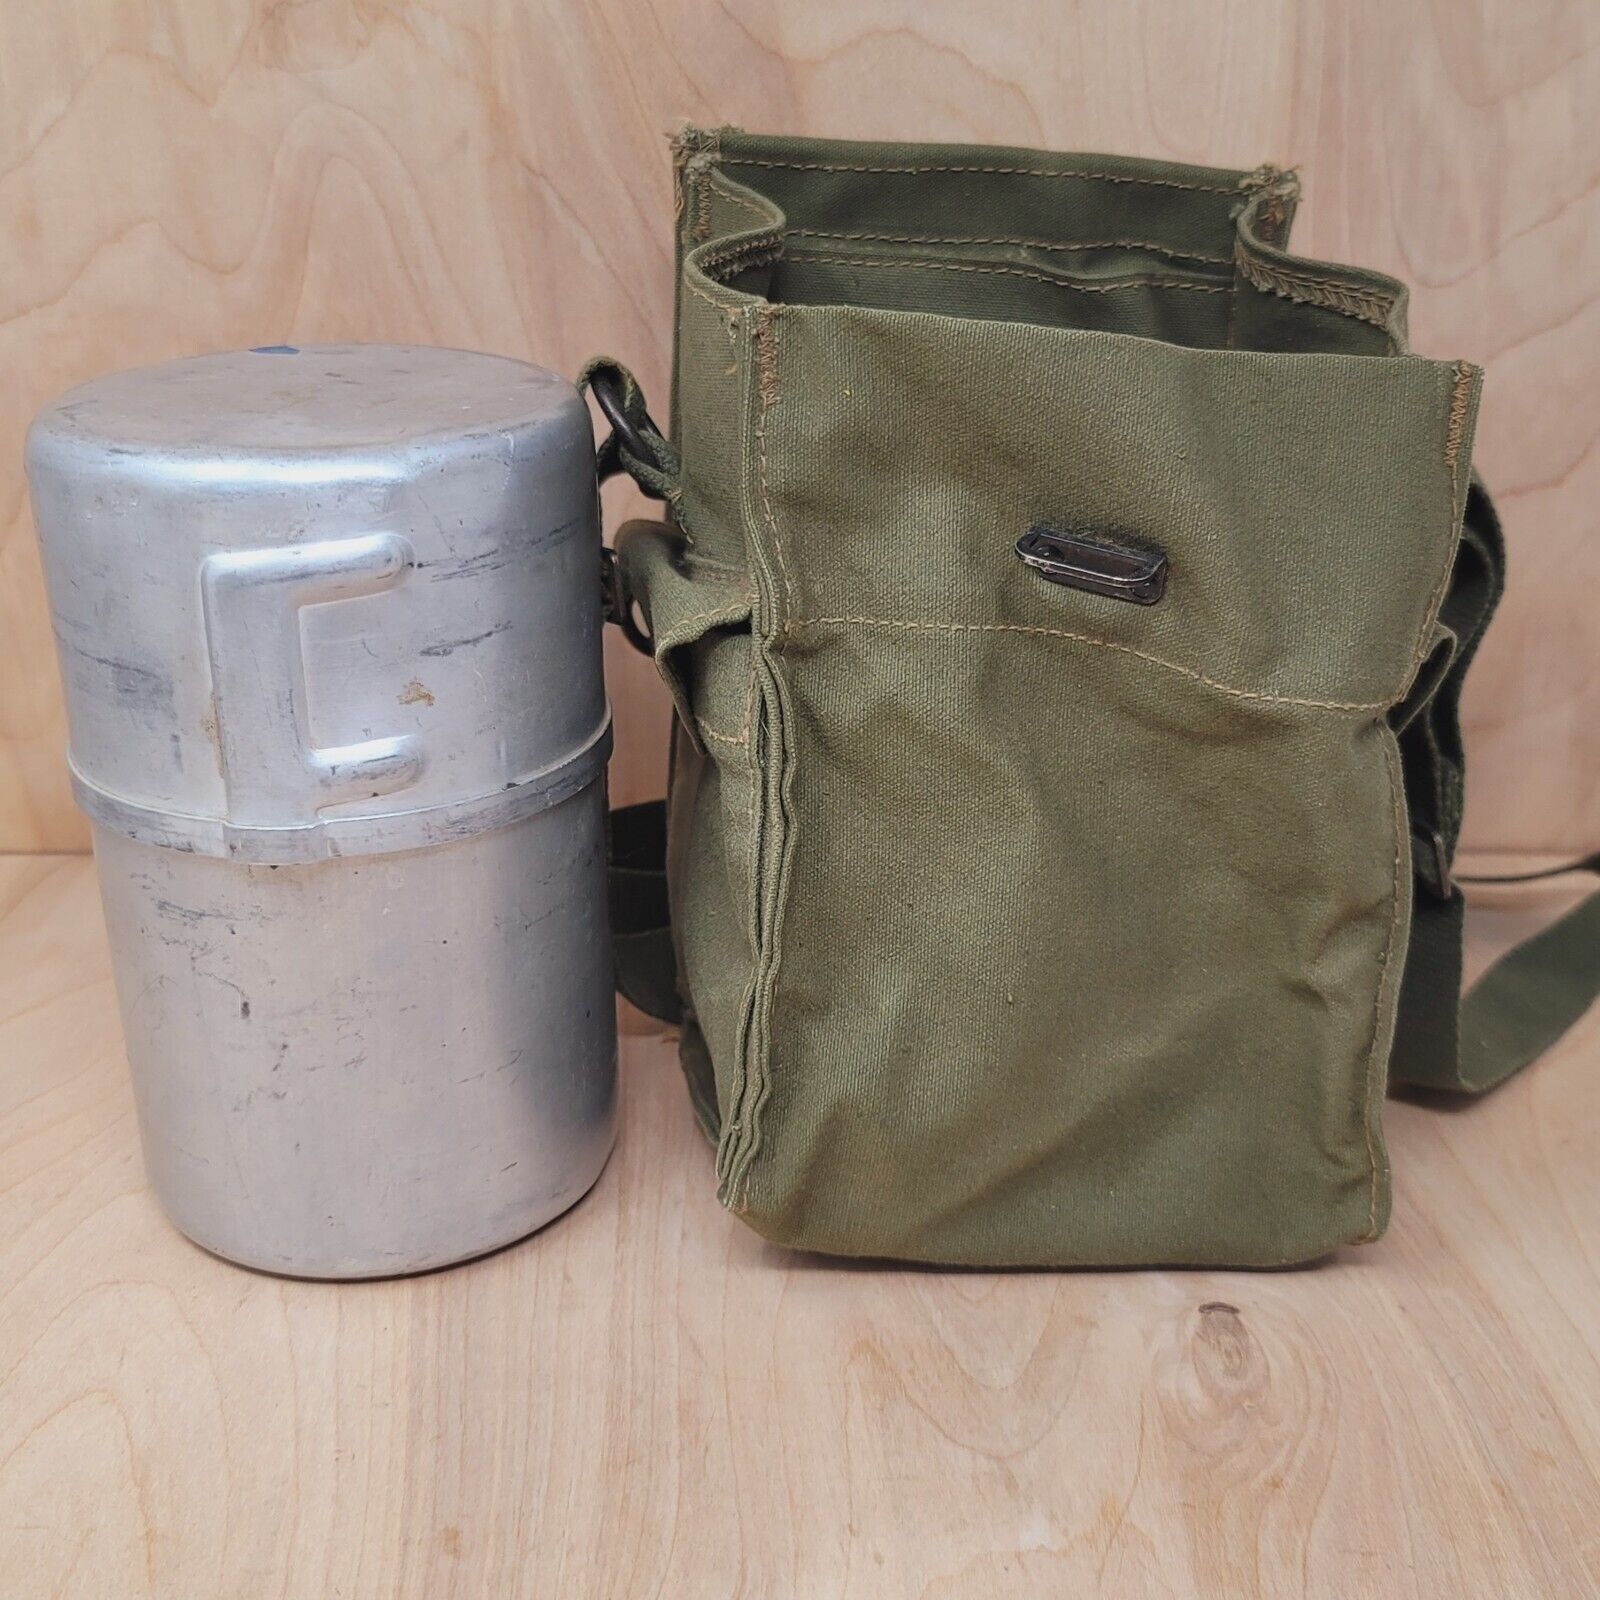 Vintage 1945 Military Camp Stove Container With Bag WWII